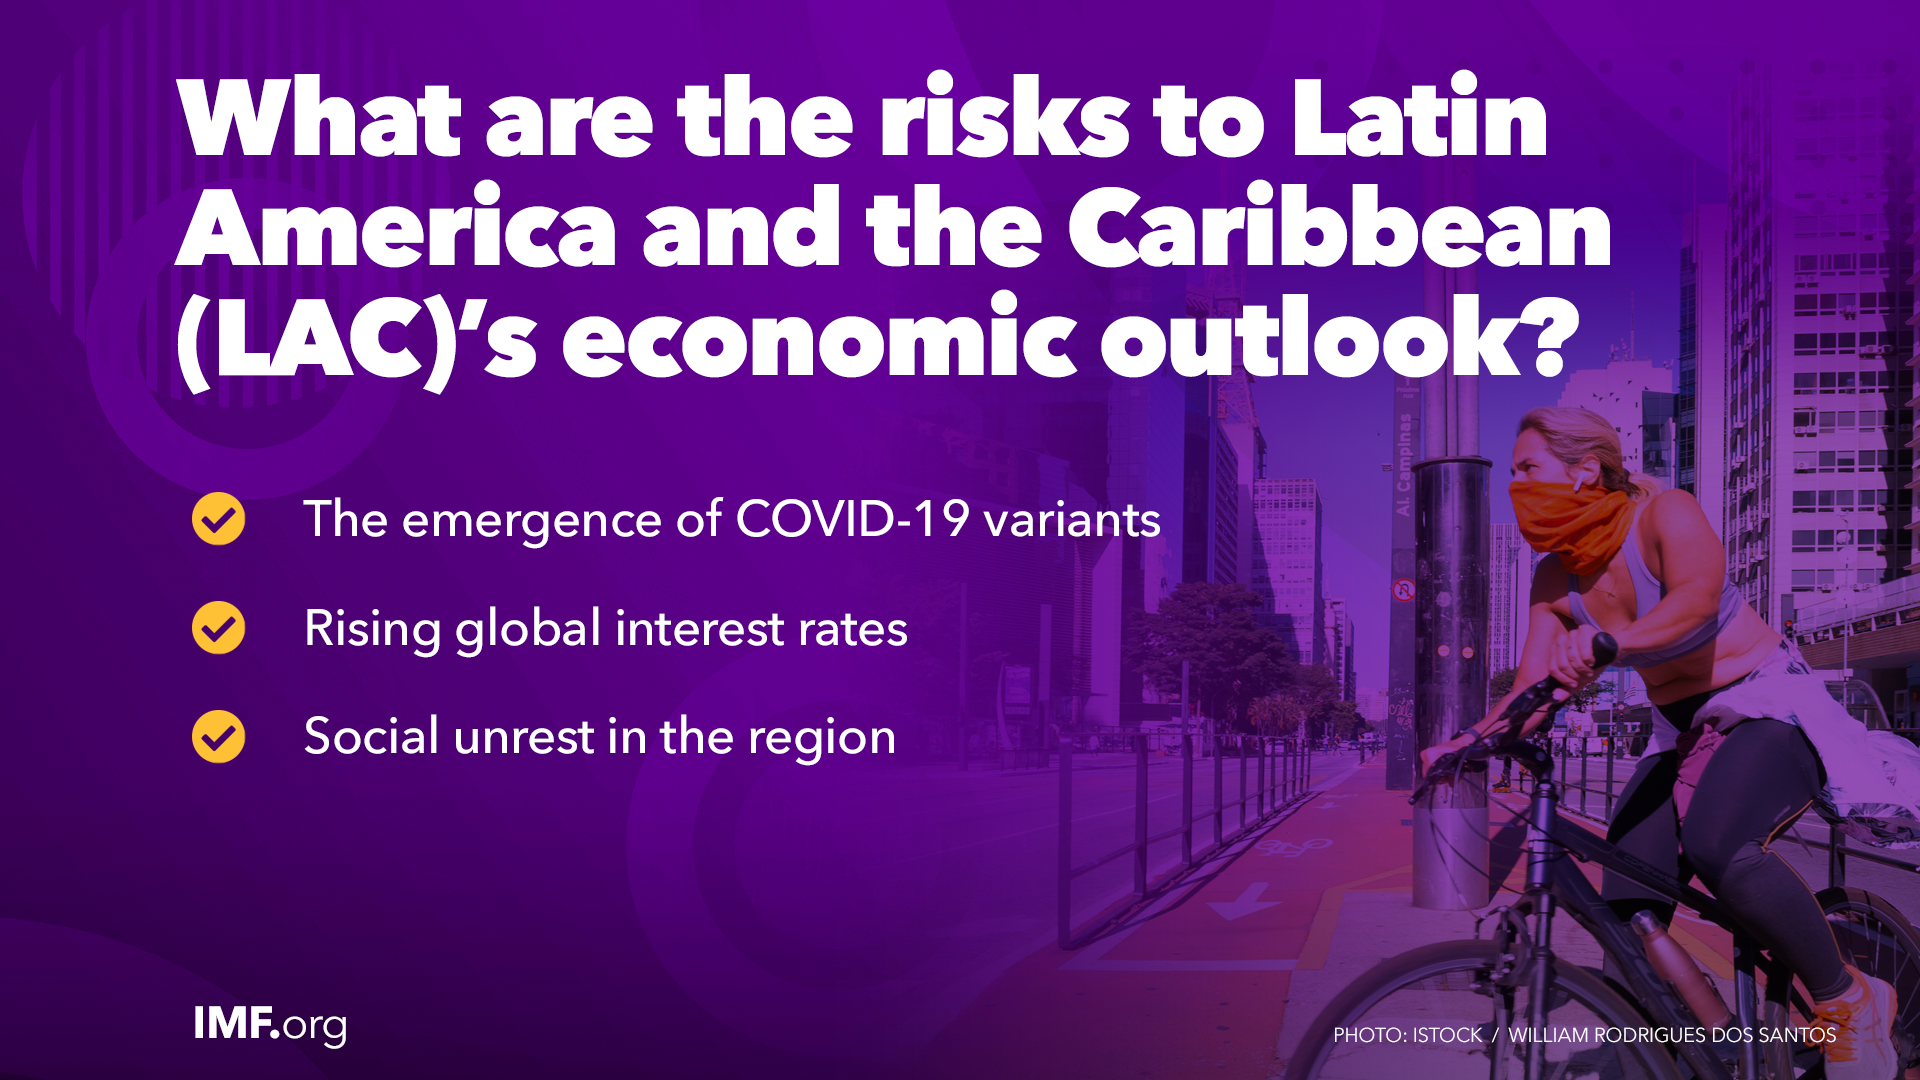 Regional Economic Outlook for Latin America and the Caribbean - Digital Card